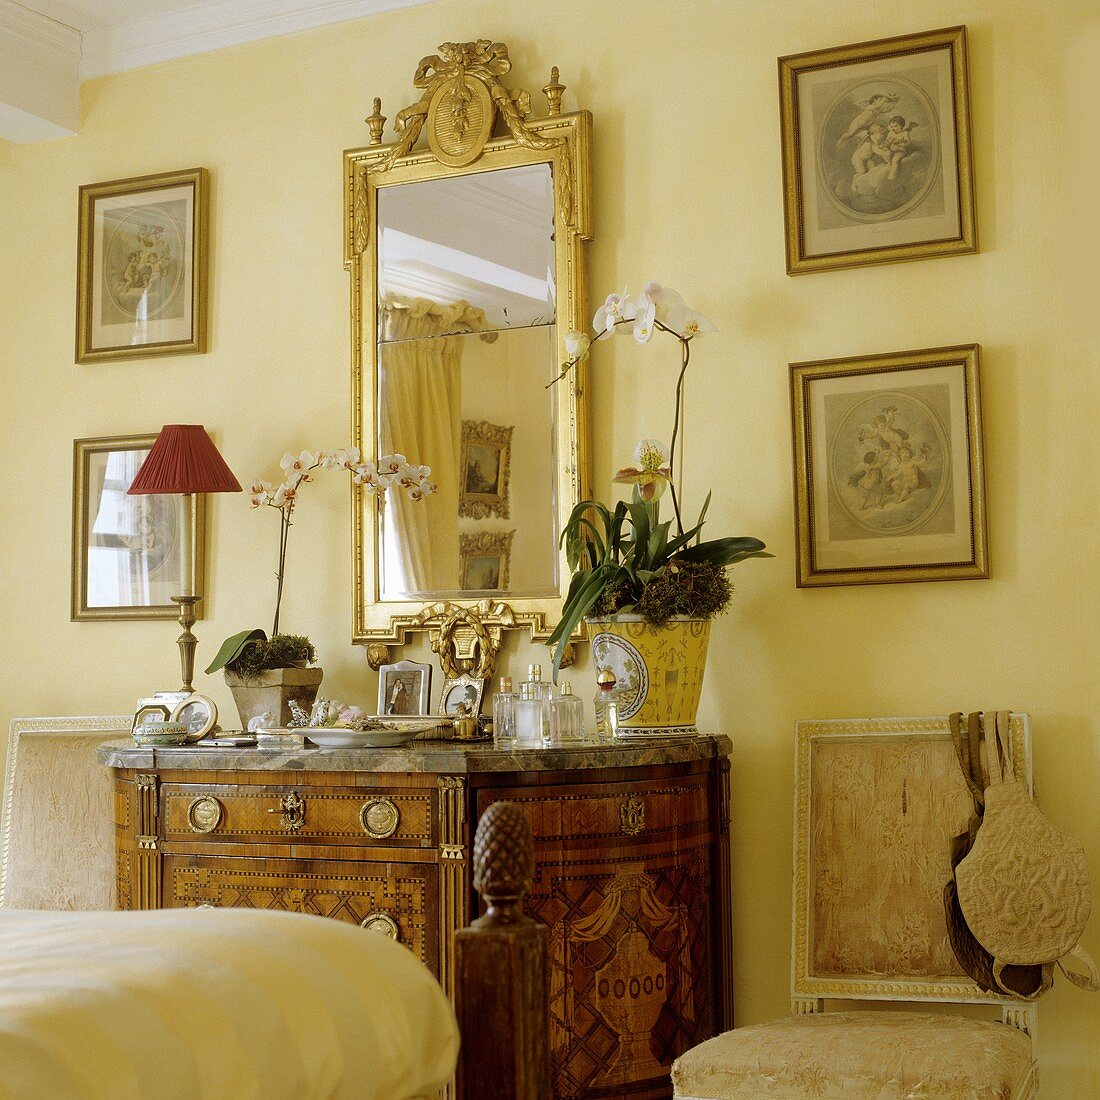 An antique wooden chest of drawers with a gold framed mirror on a yellow-painted wall in a bedroom